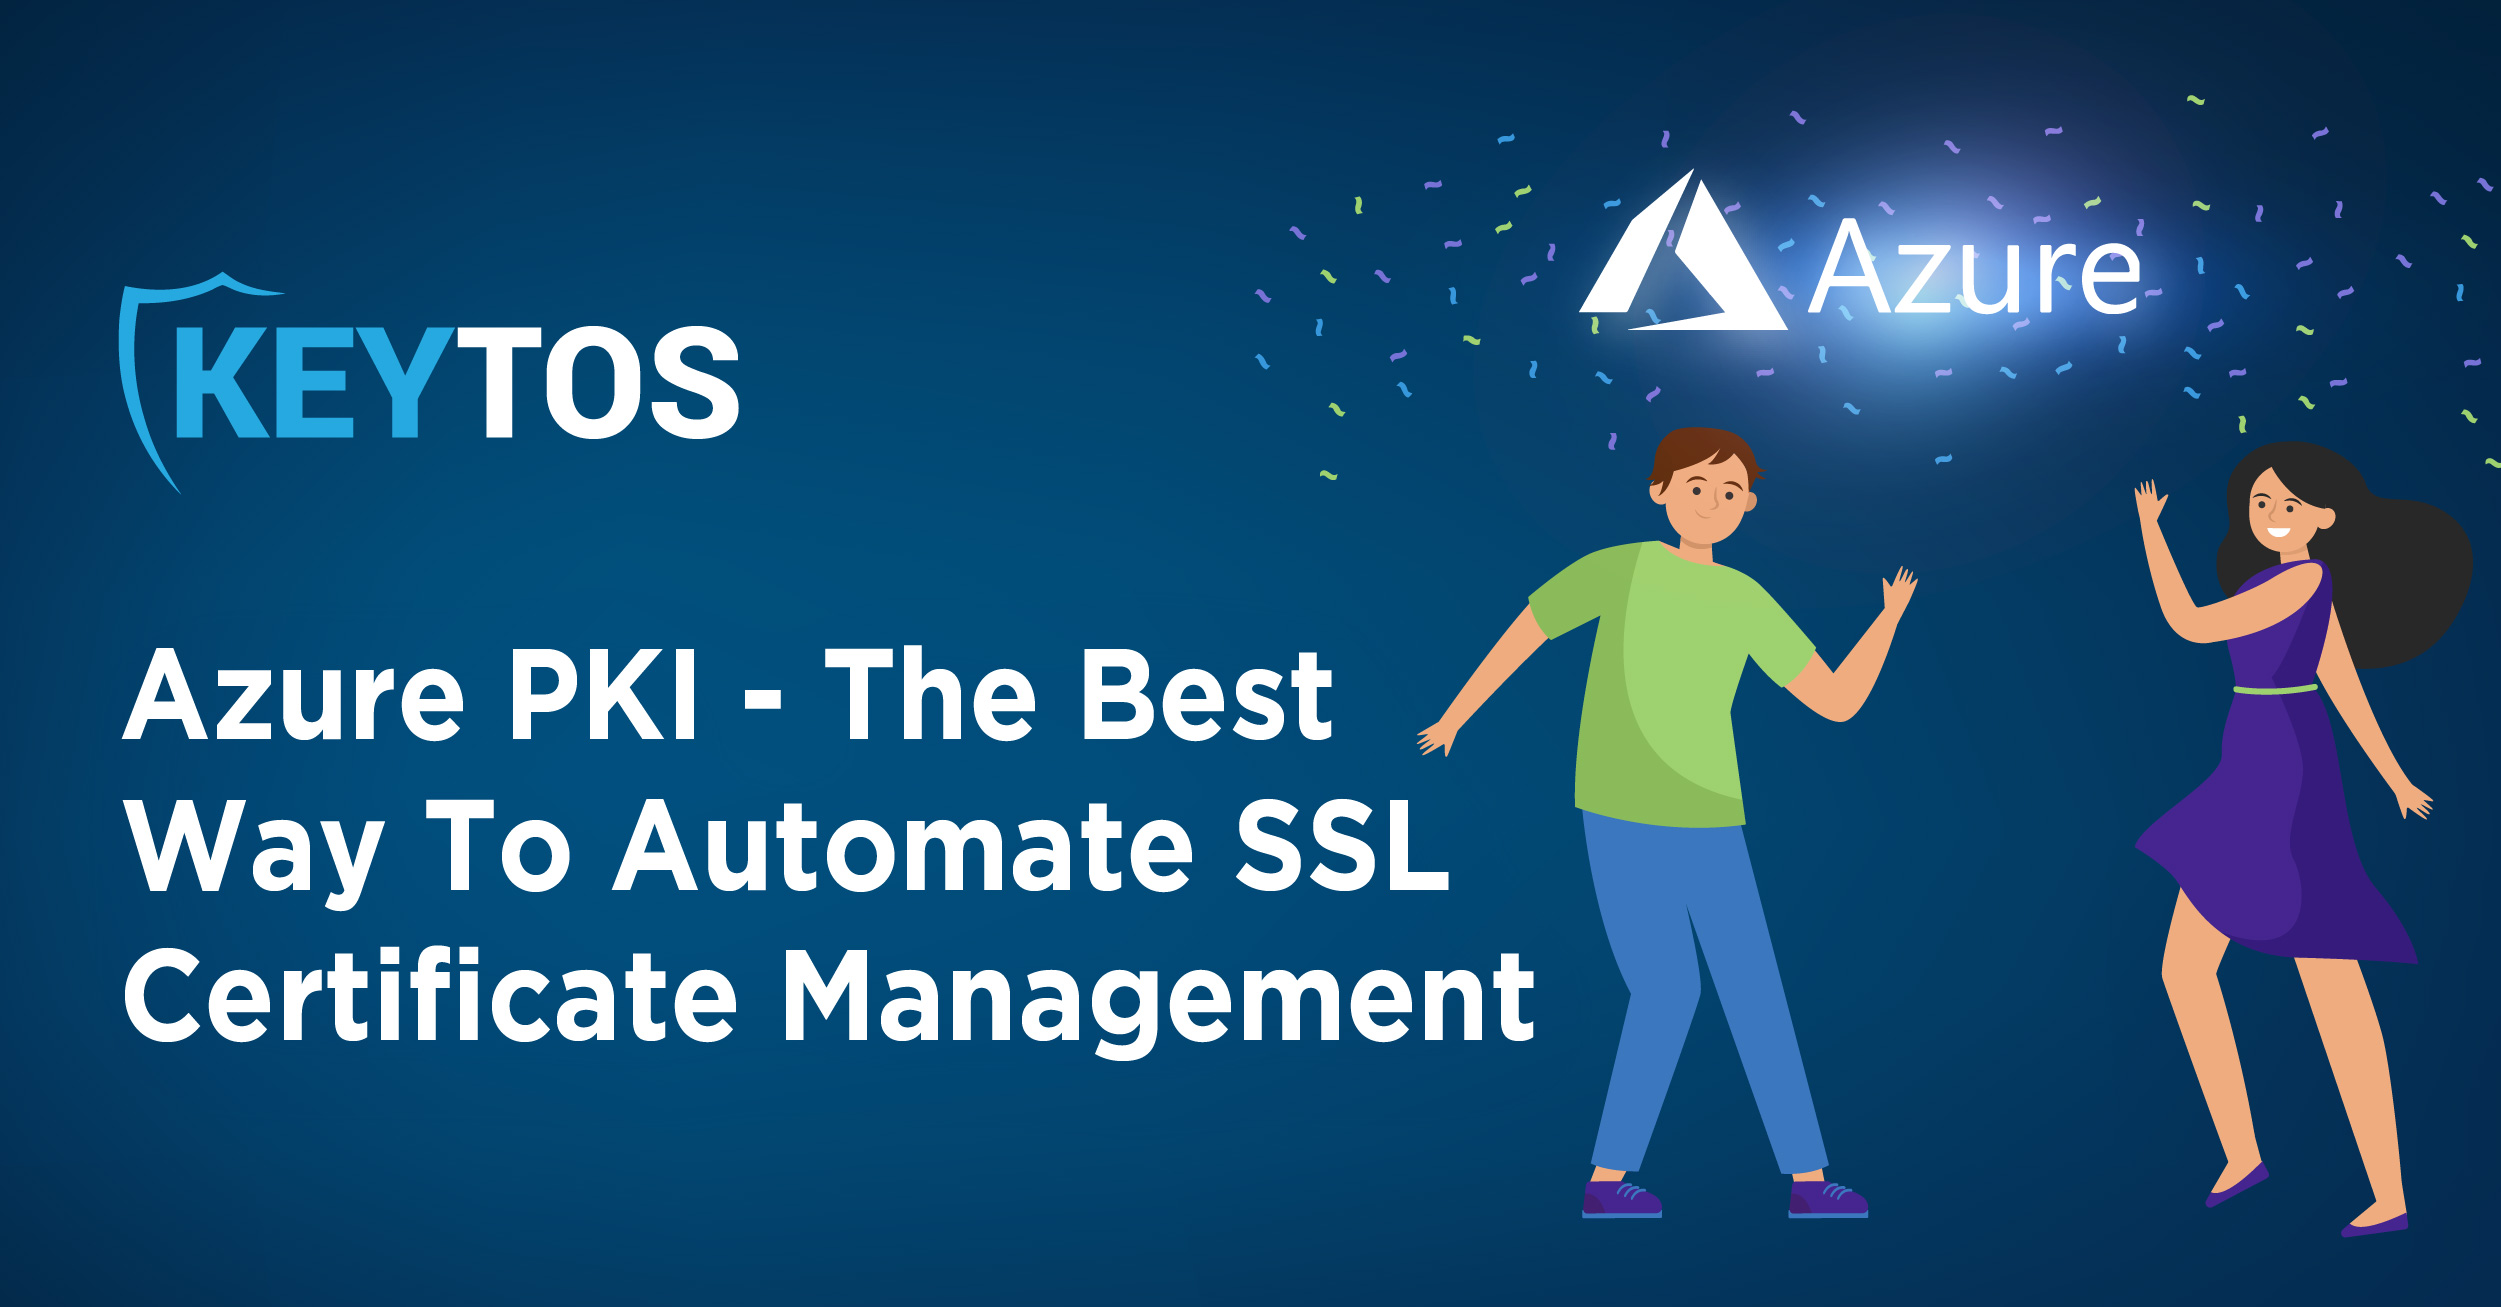 Azure PKI: the Best Way to Automate SSL Certificates